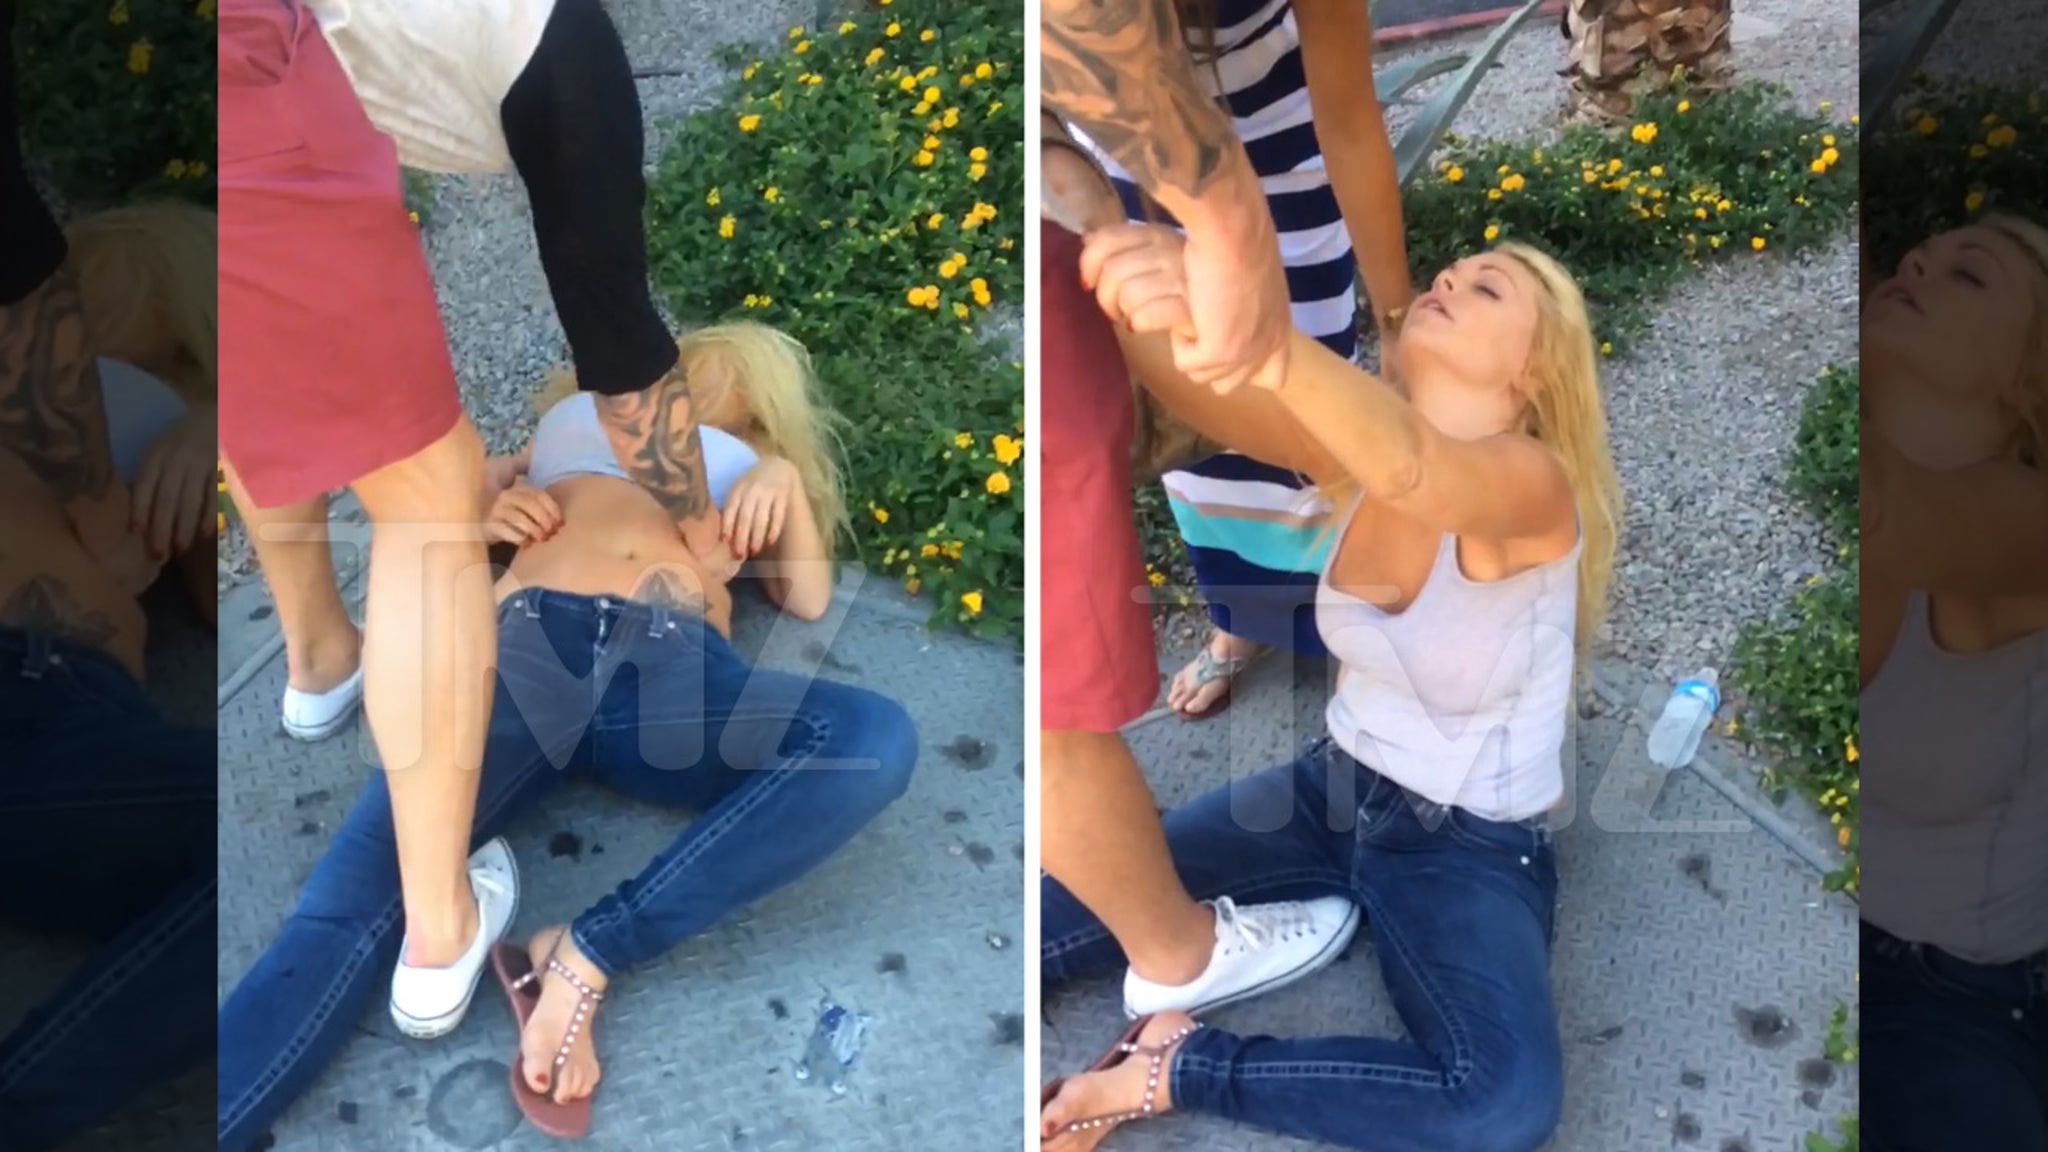 Porn Star Jesse Jane -- Passed OUT COLD On the Vegas Strip! (VIDEO)